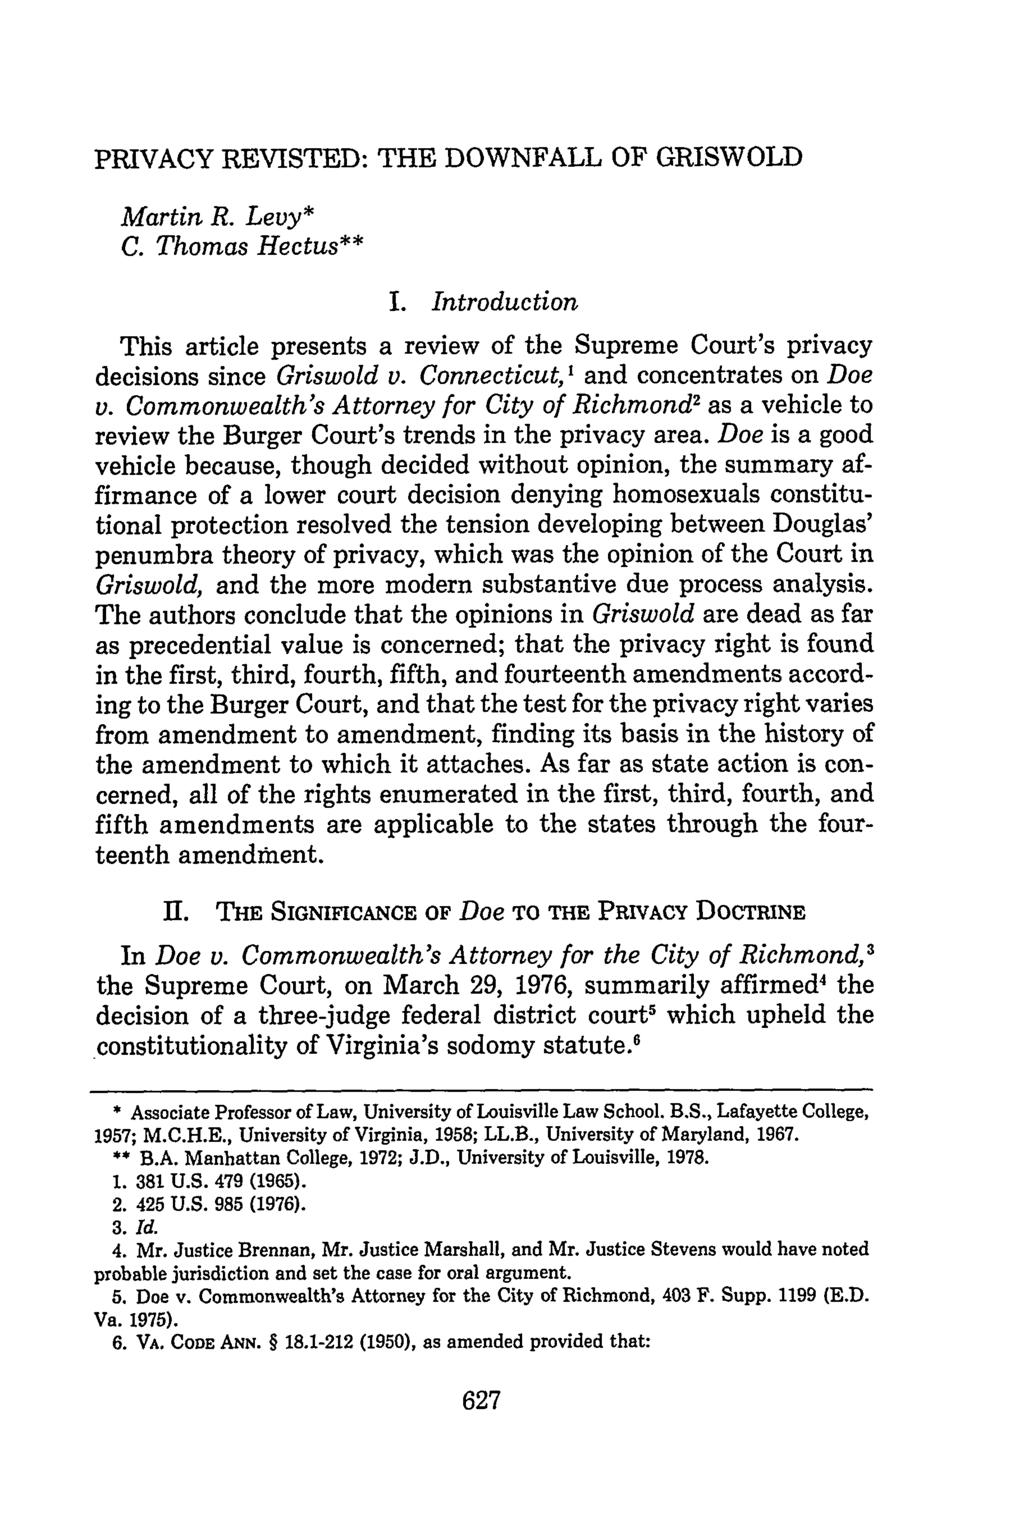 PRIVACY REVISTED: THE DOWNFALL OF GRISWOLD Martin R. Levy* C. Thomas Hectus** I. Introduction This article presents a review of the Supreme Court's privacy decisions since Griswold v.